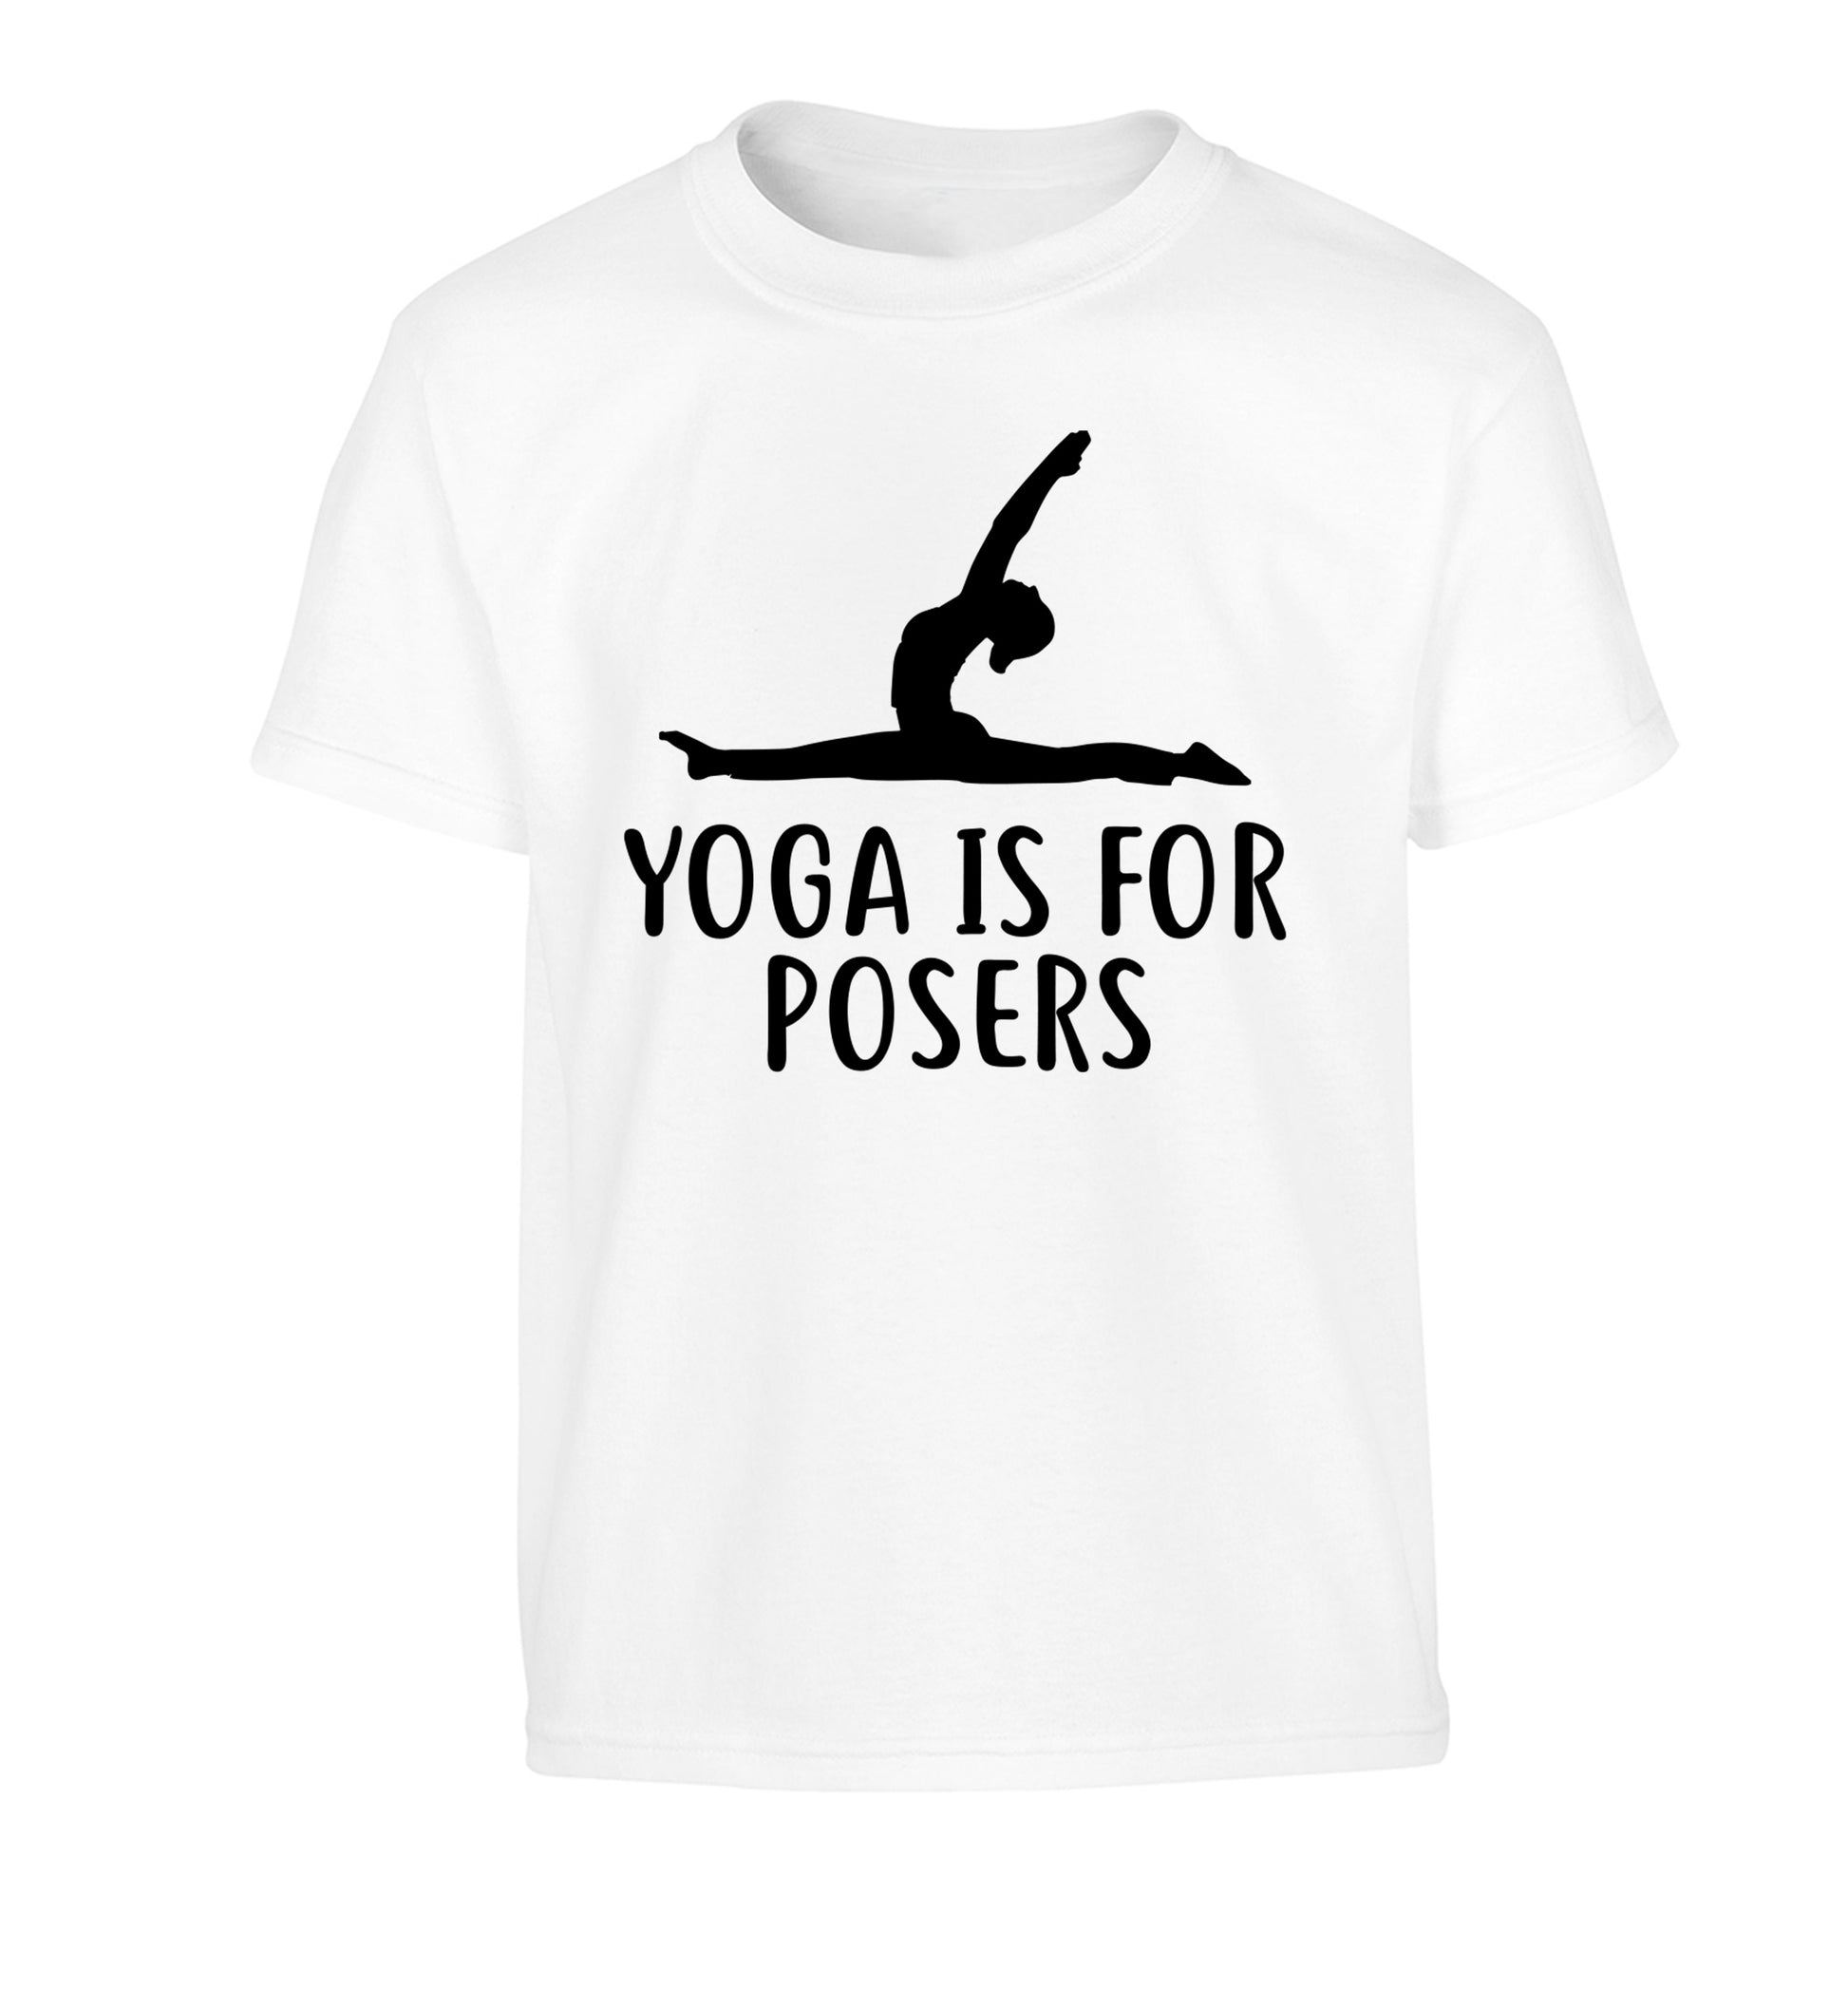 Yoga is for posers Children's white Tshirt 12-13 Years